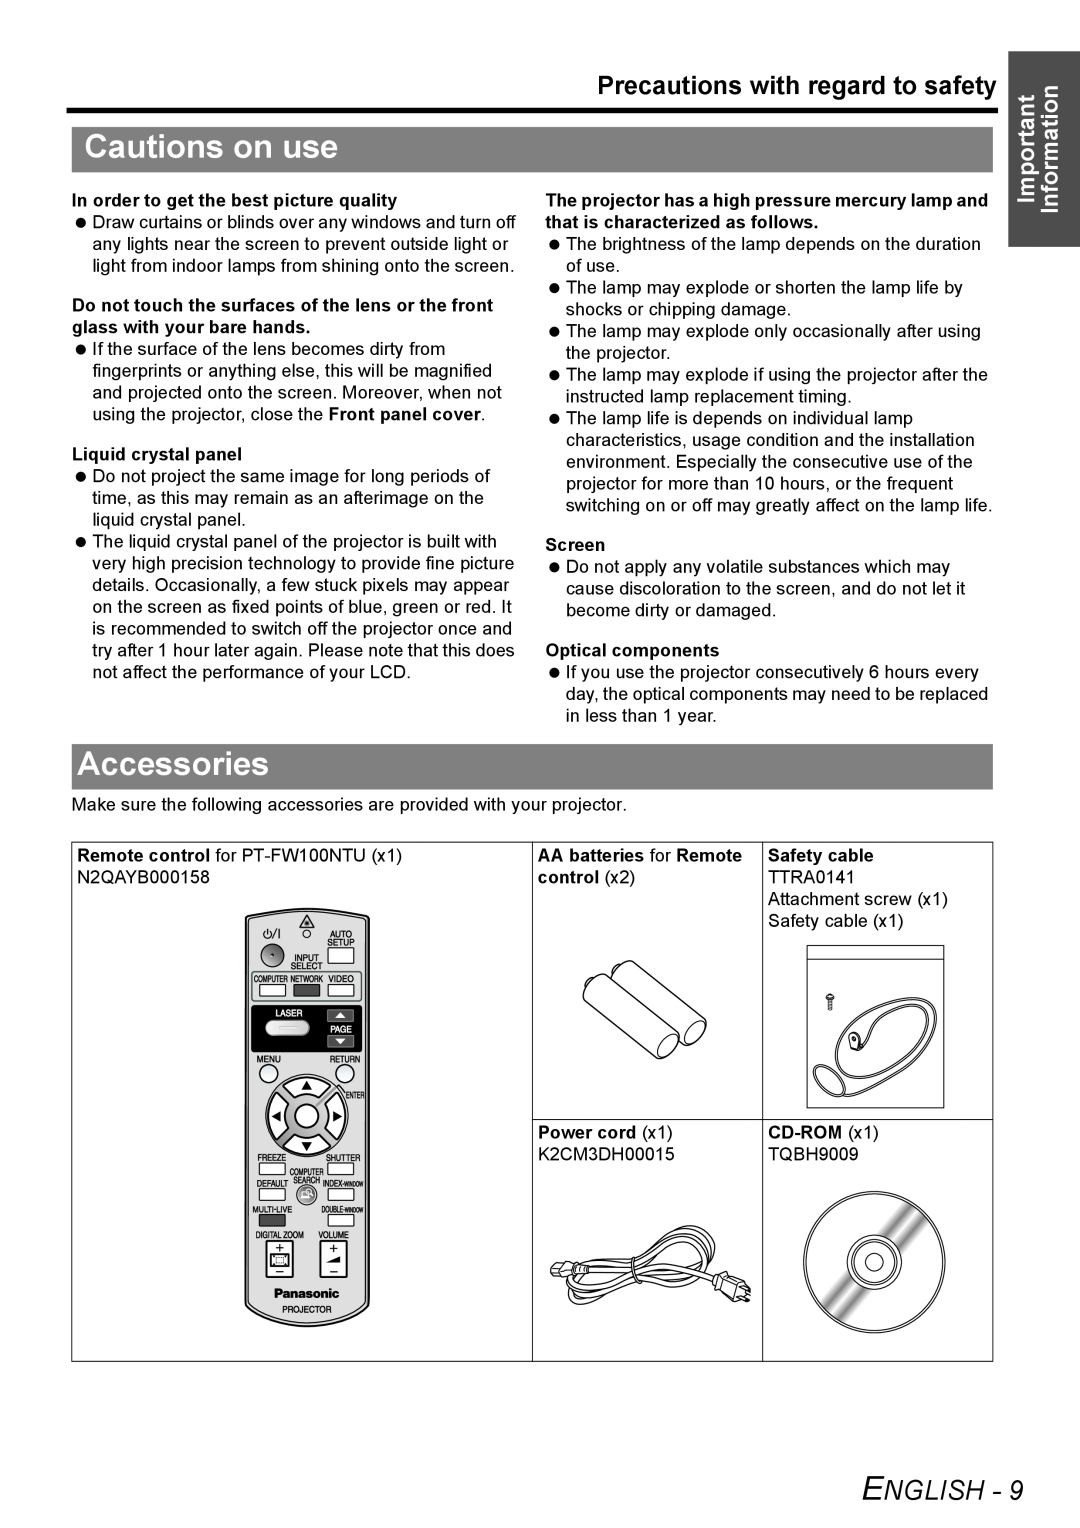 Panasonic PT-FW100NTU Cautions on use, Accessories, English, Precautions with regard to safety, Important Information 